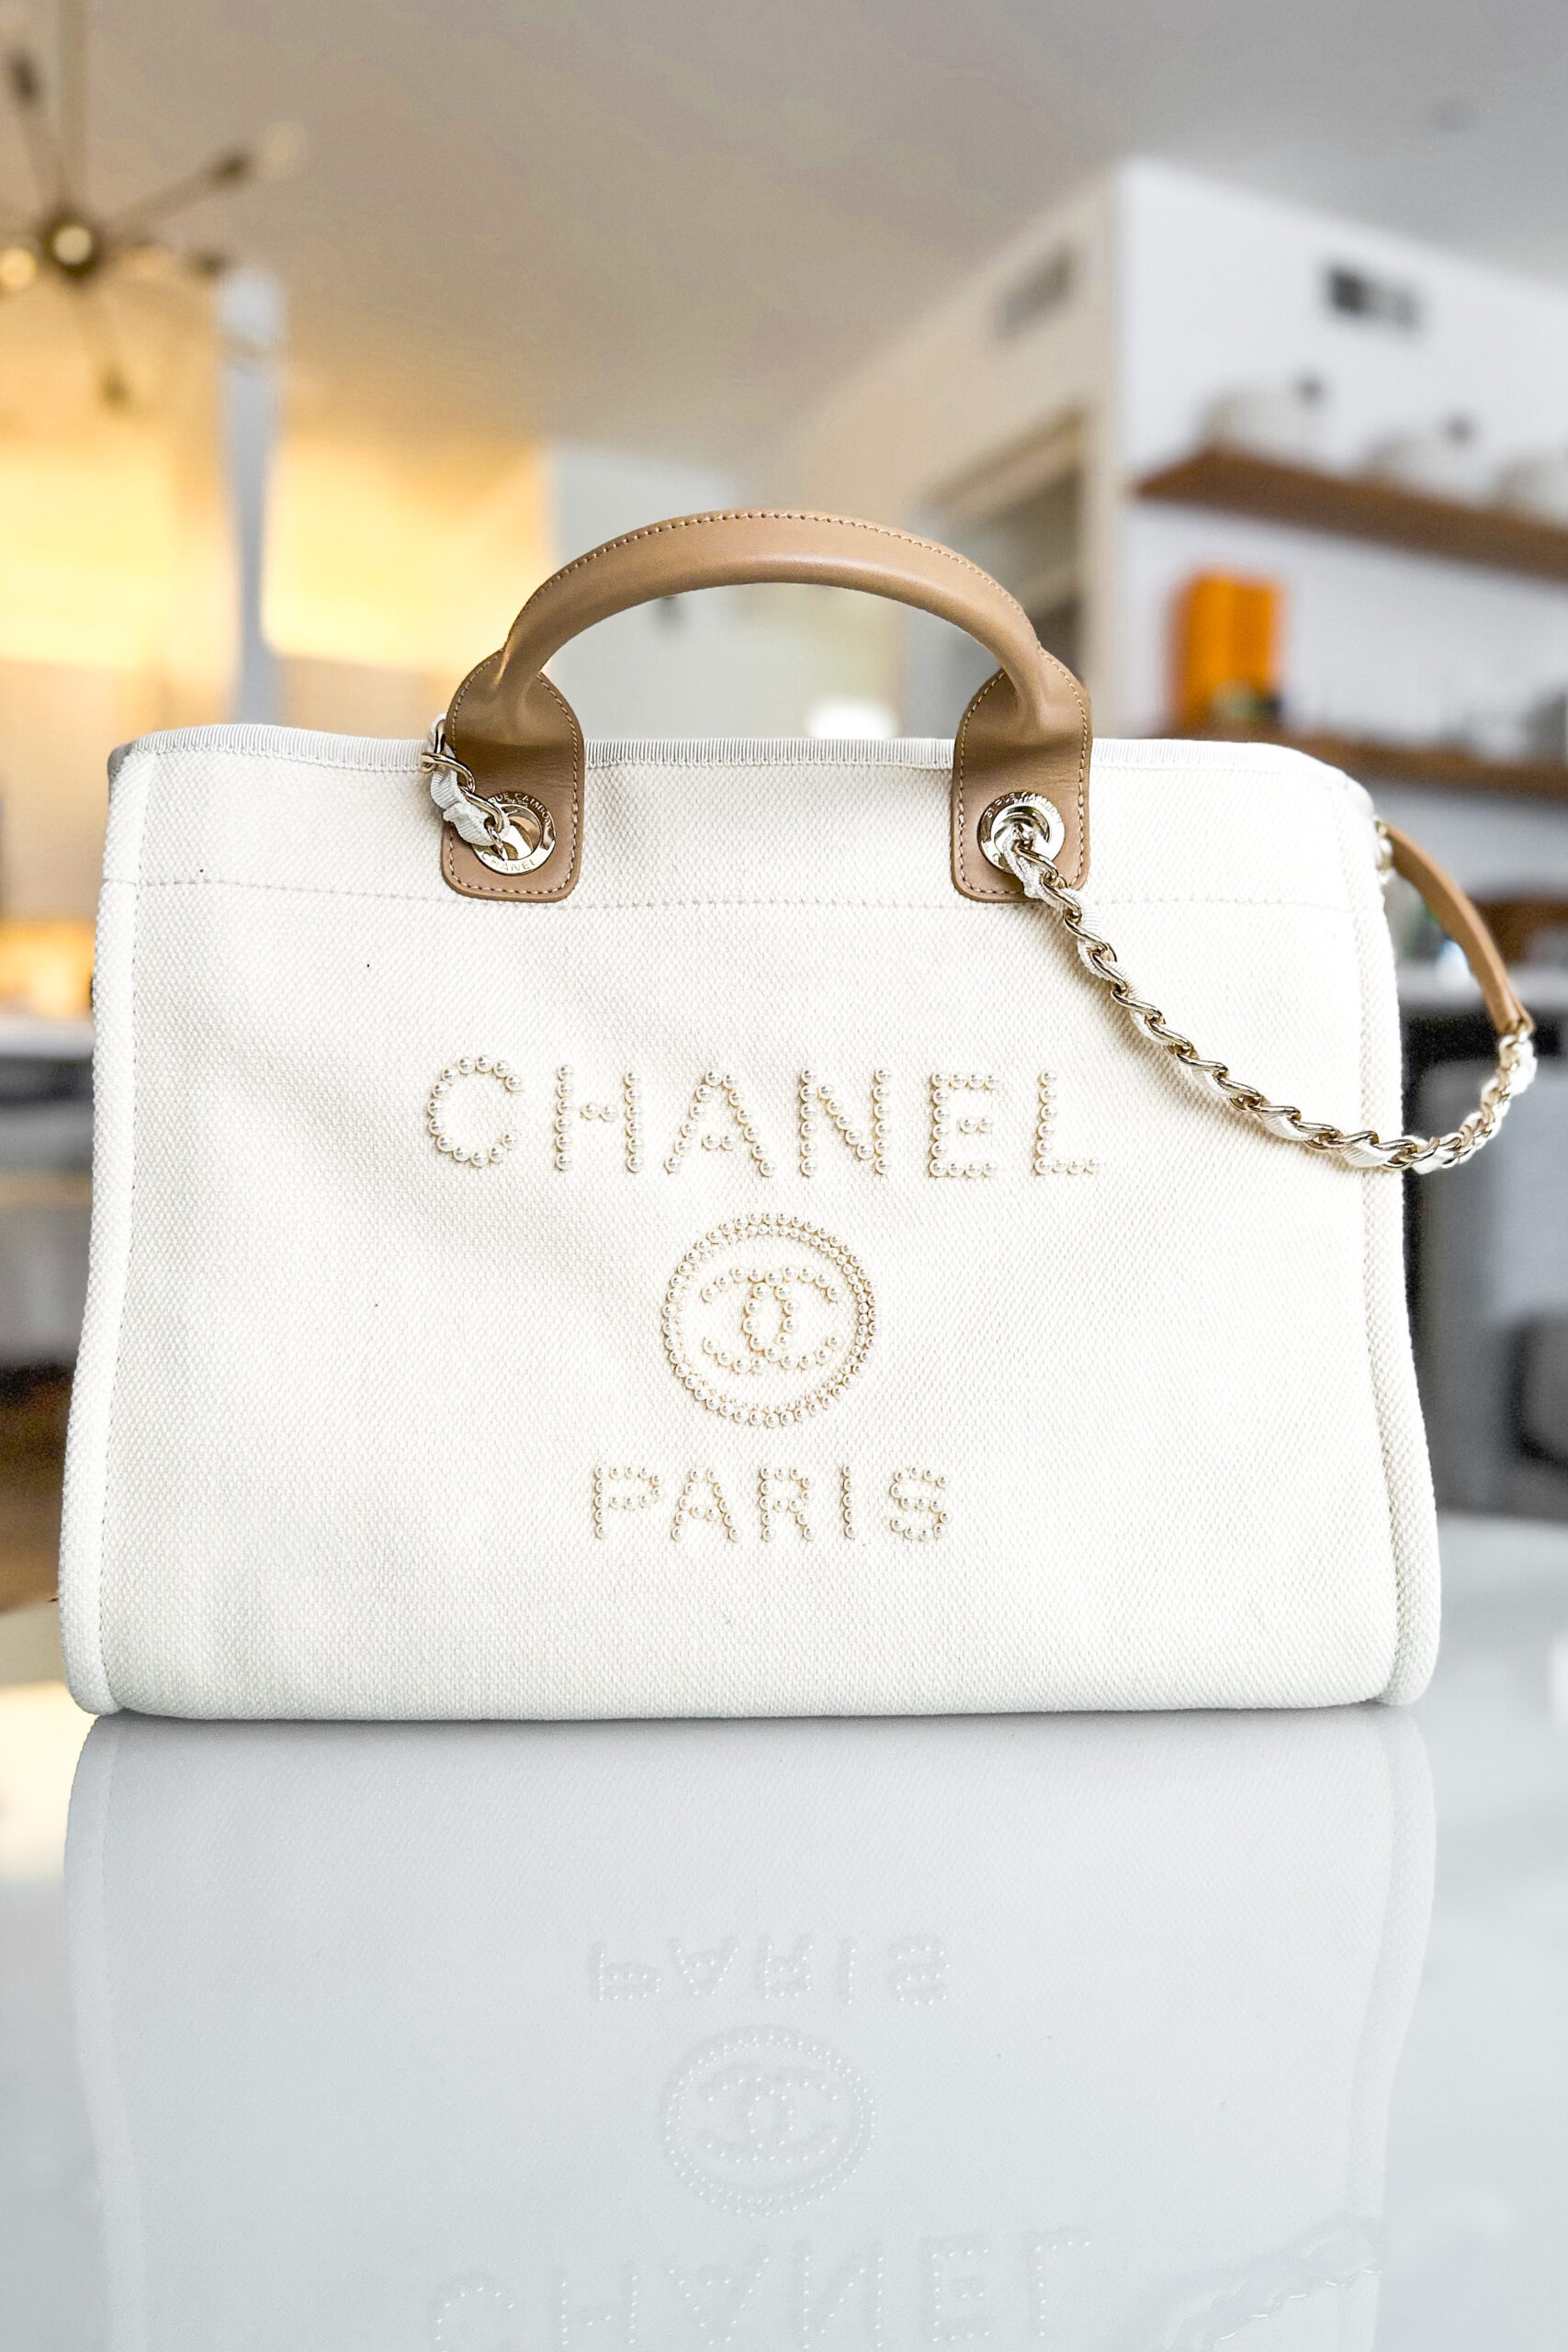 Where to Buy The Cheapest Chanel in 2023